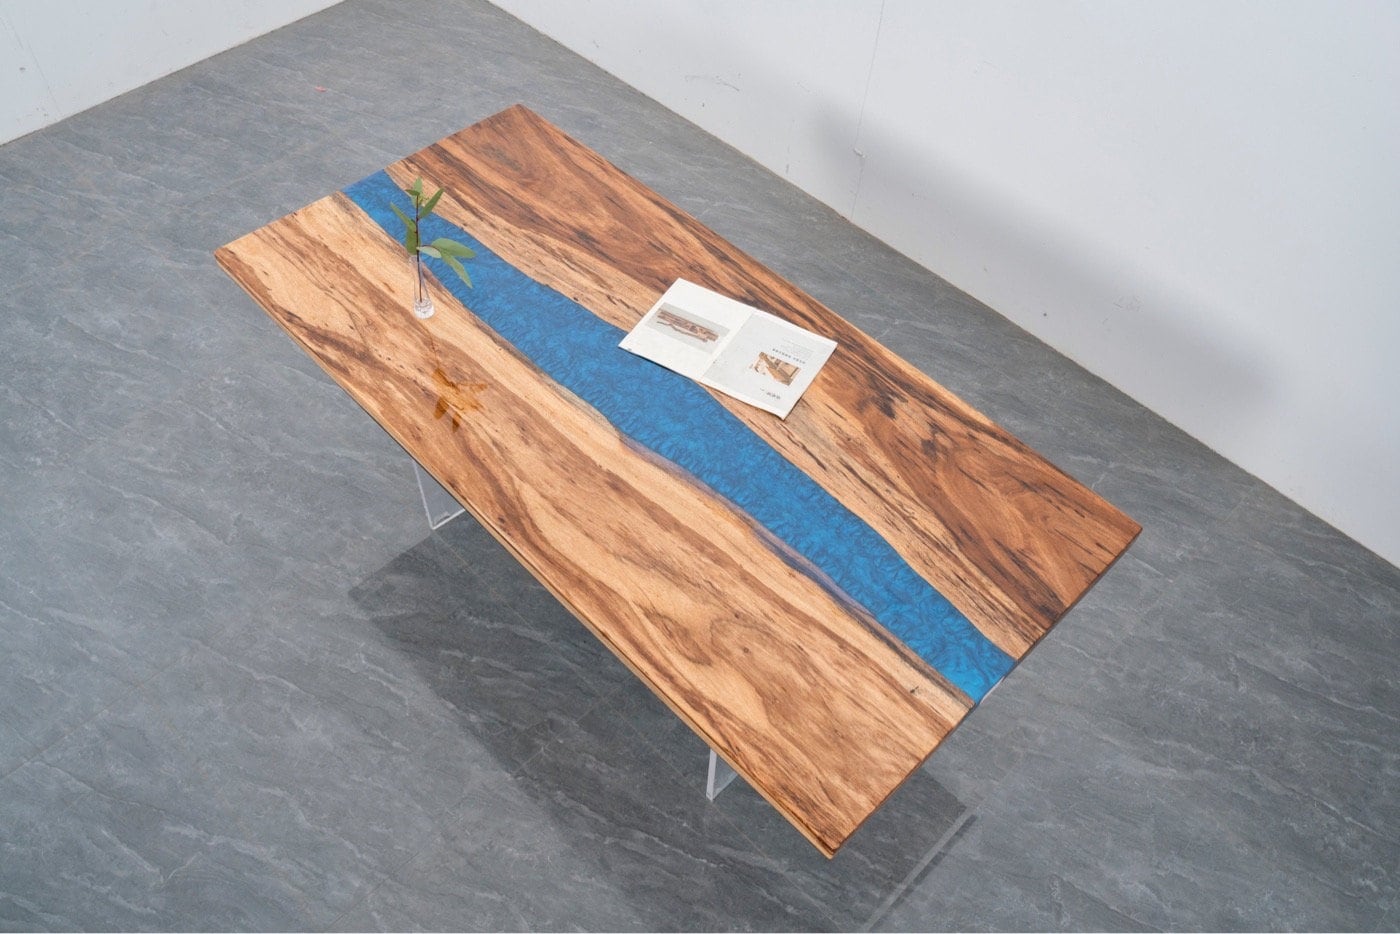 unique epoxy dining table, epoxy kitchen dining table, river Beli noir wood epoxy table, natural Wood epoxy table